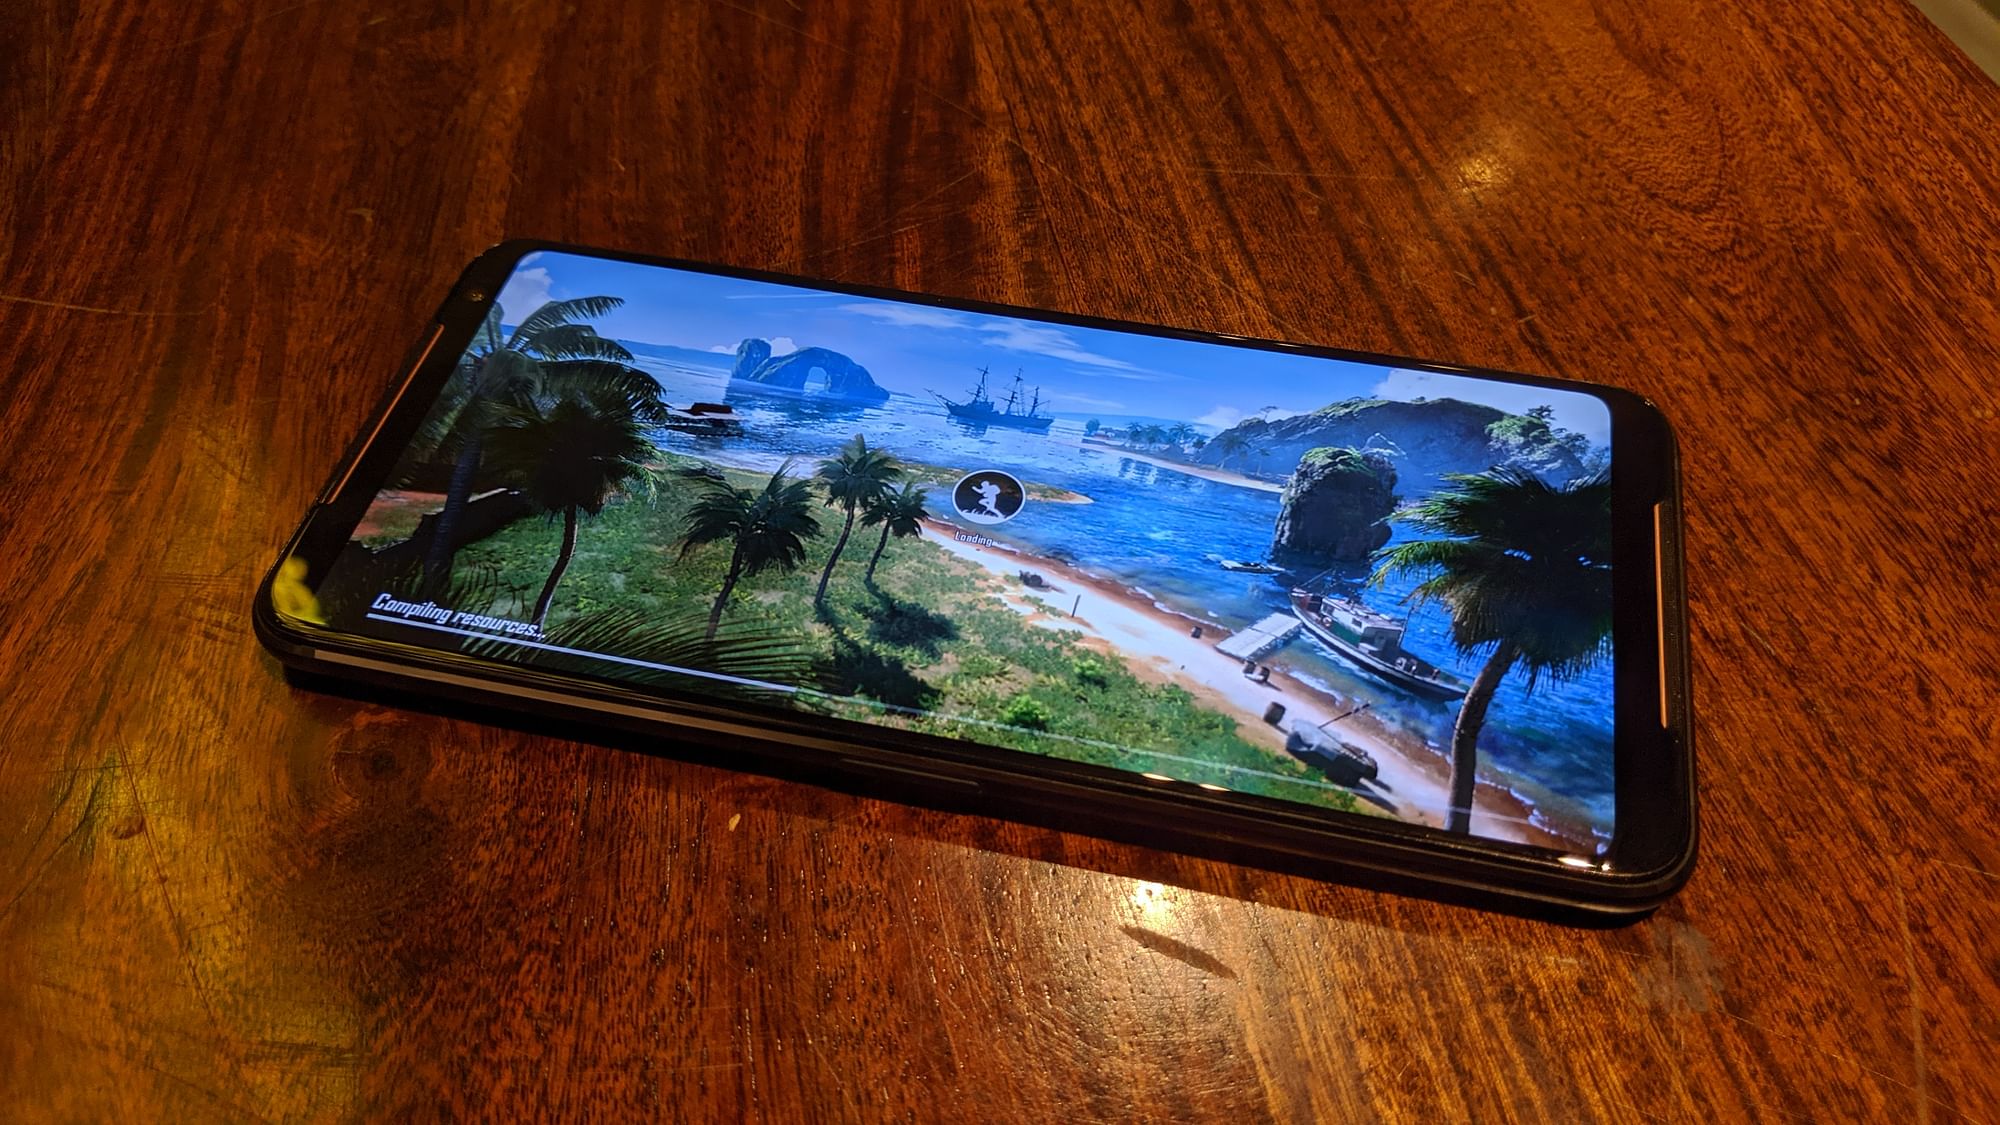 PUBG Mobile is set to receive the new update on 15 February.